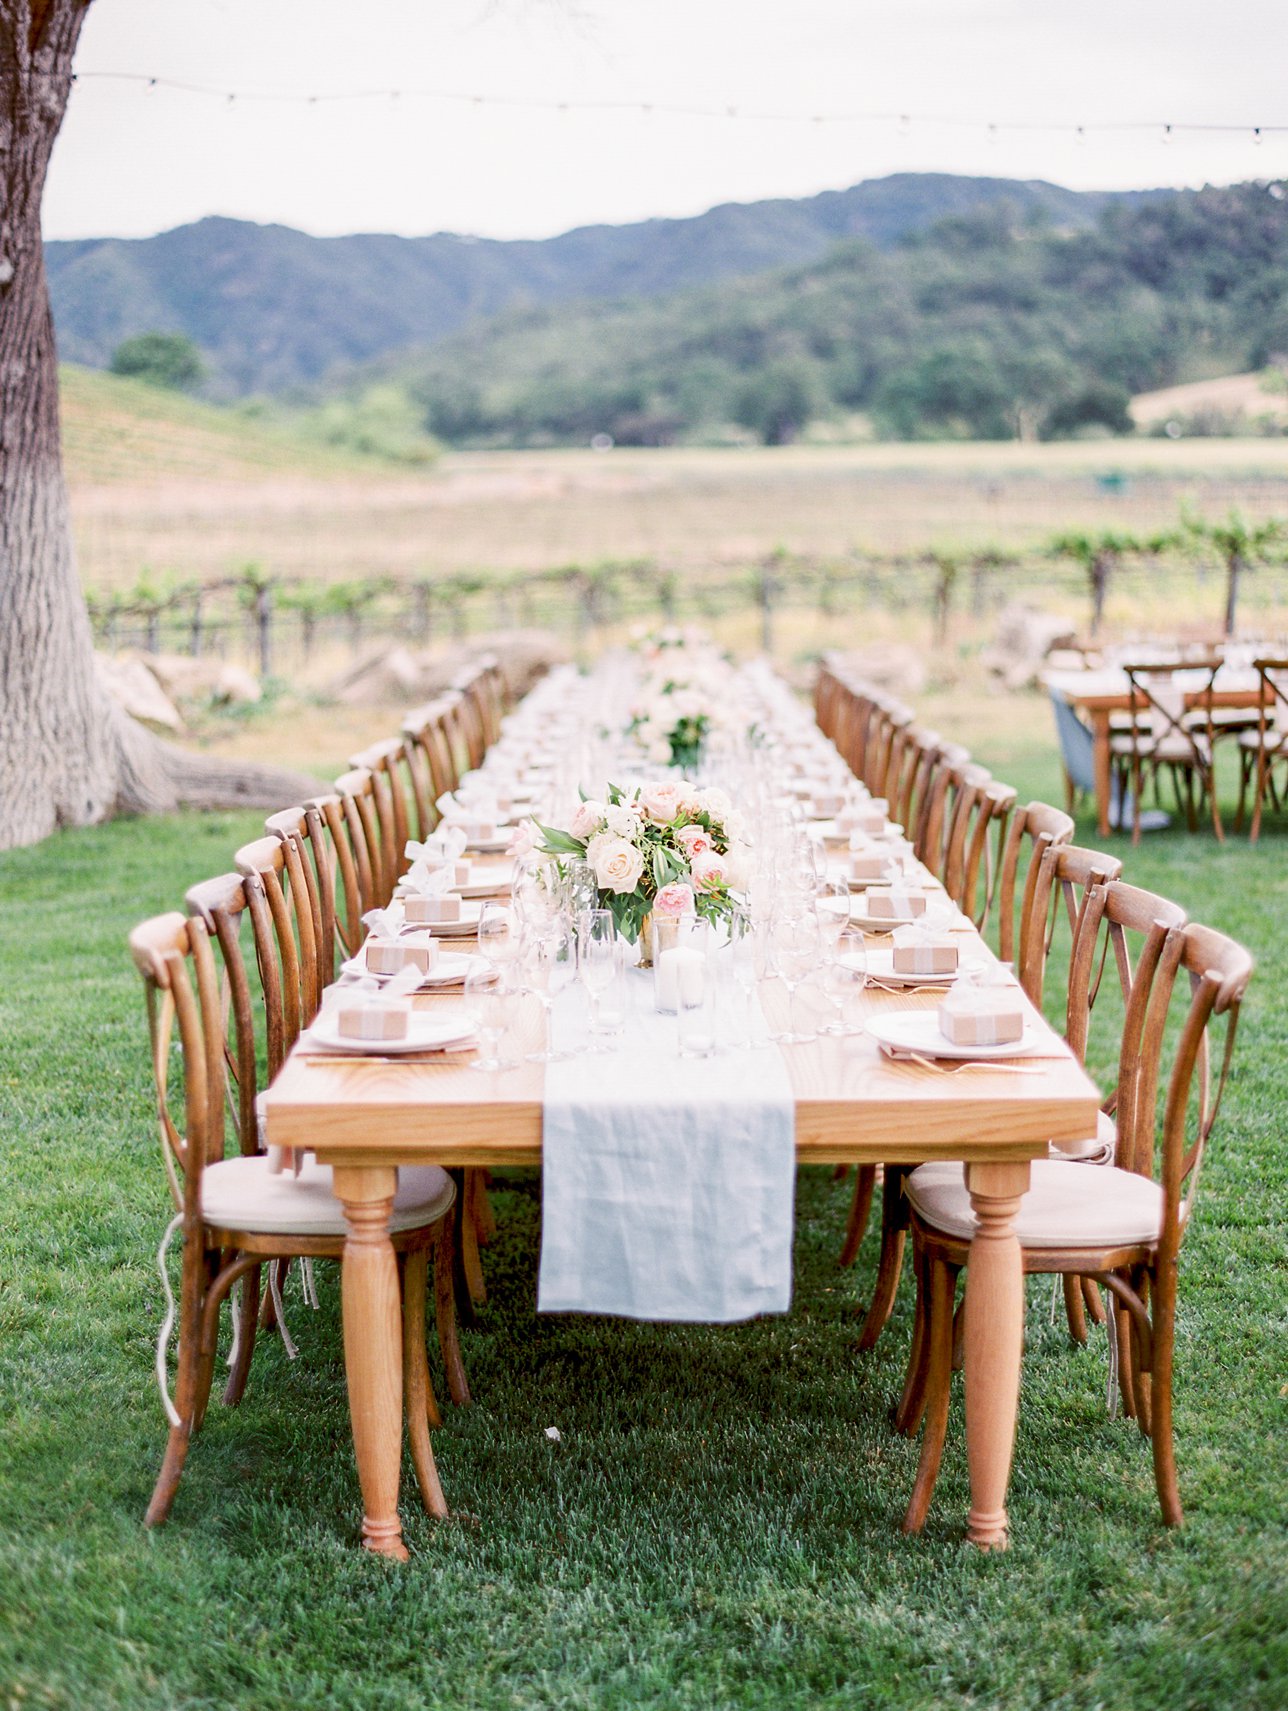 HammerSky Vineyards wedding photos - Paso Robles Wedding Photographer | Rachel Solomon Photography_9074